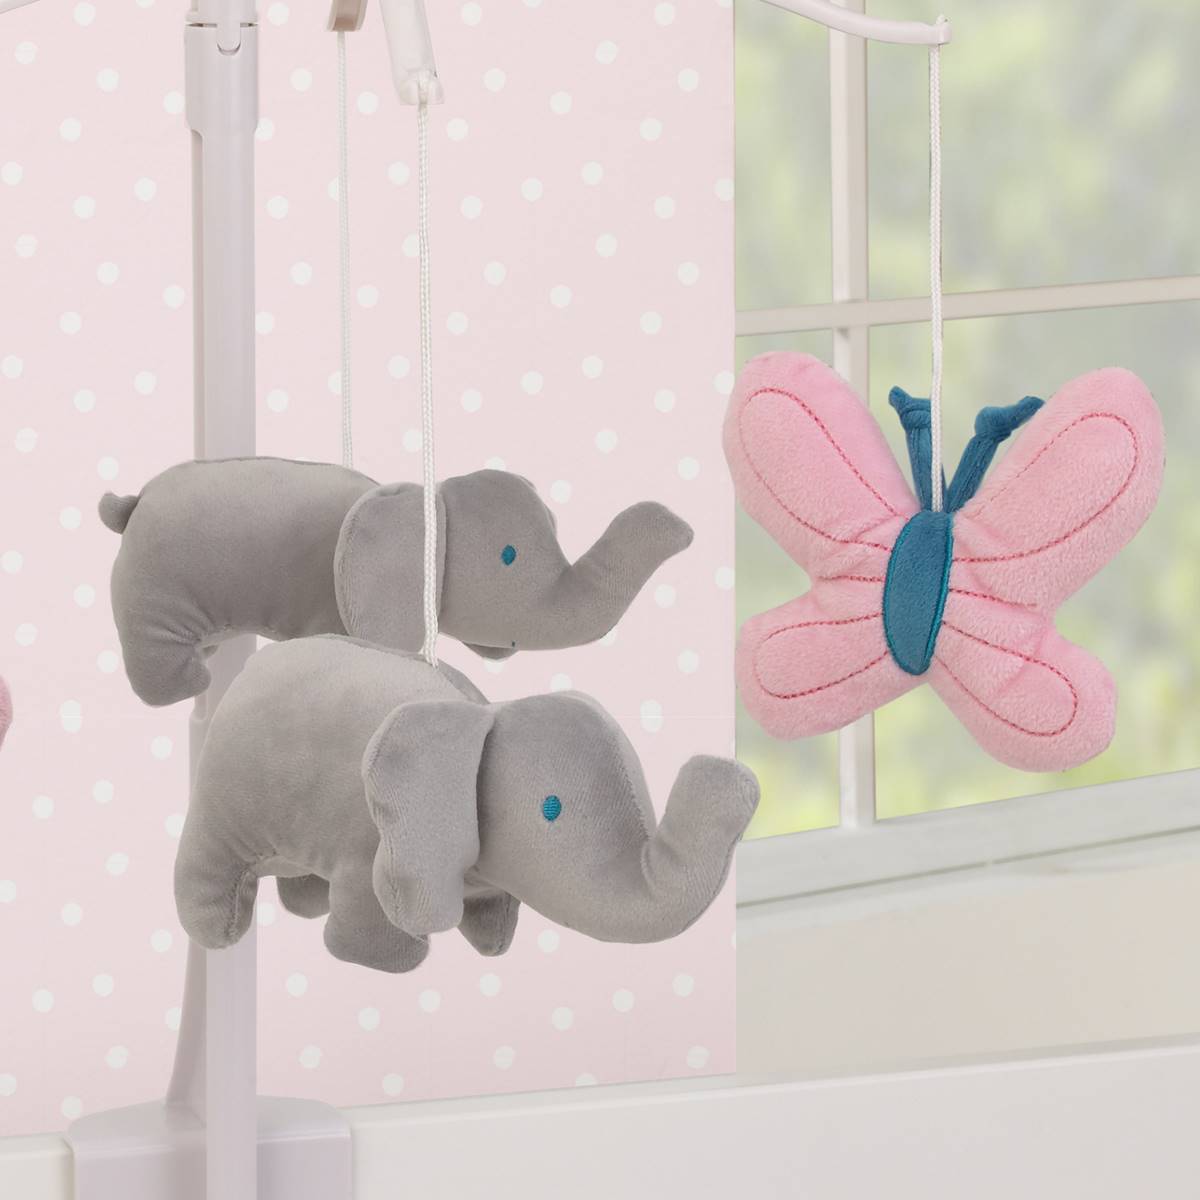 Carters(R) Floral Elephant Butterfly Musical Mobile